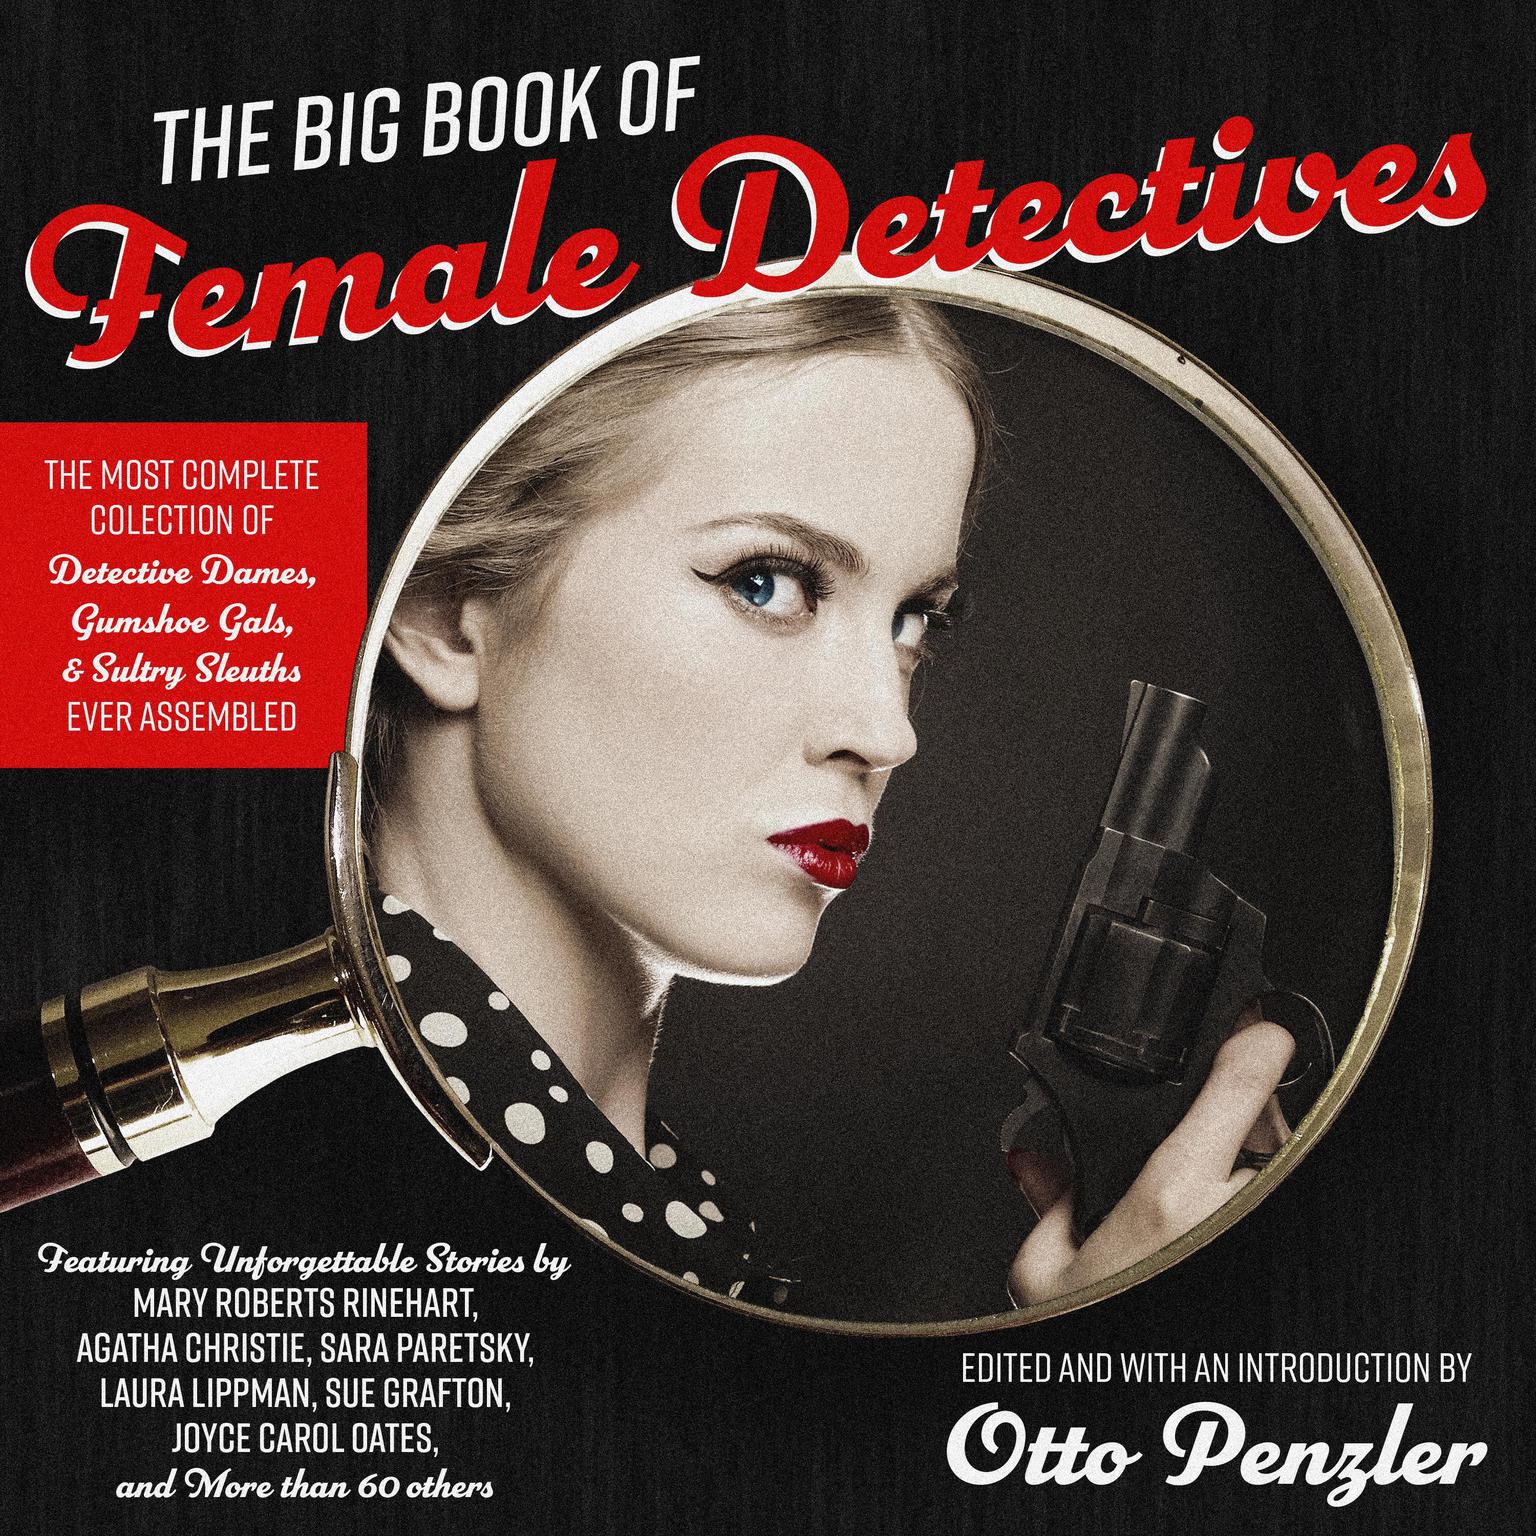 The Big Book of Female Detectives Audiobook, by Otto Penzler